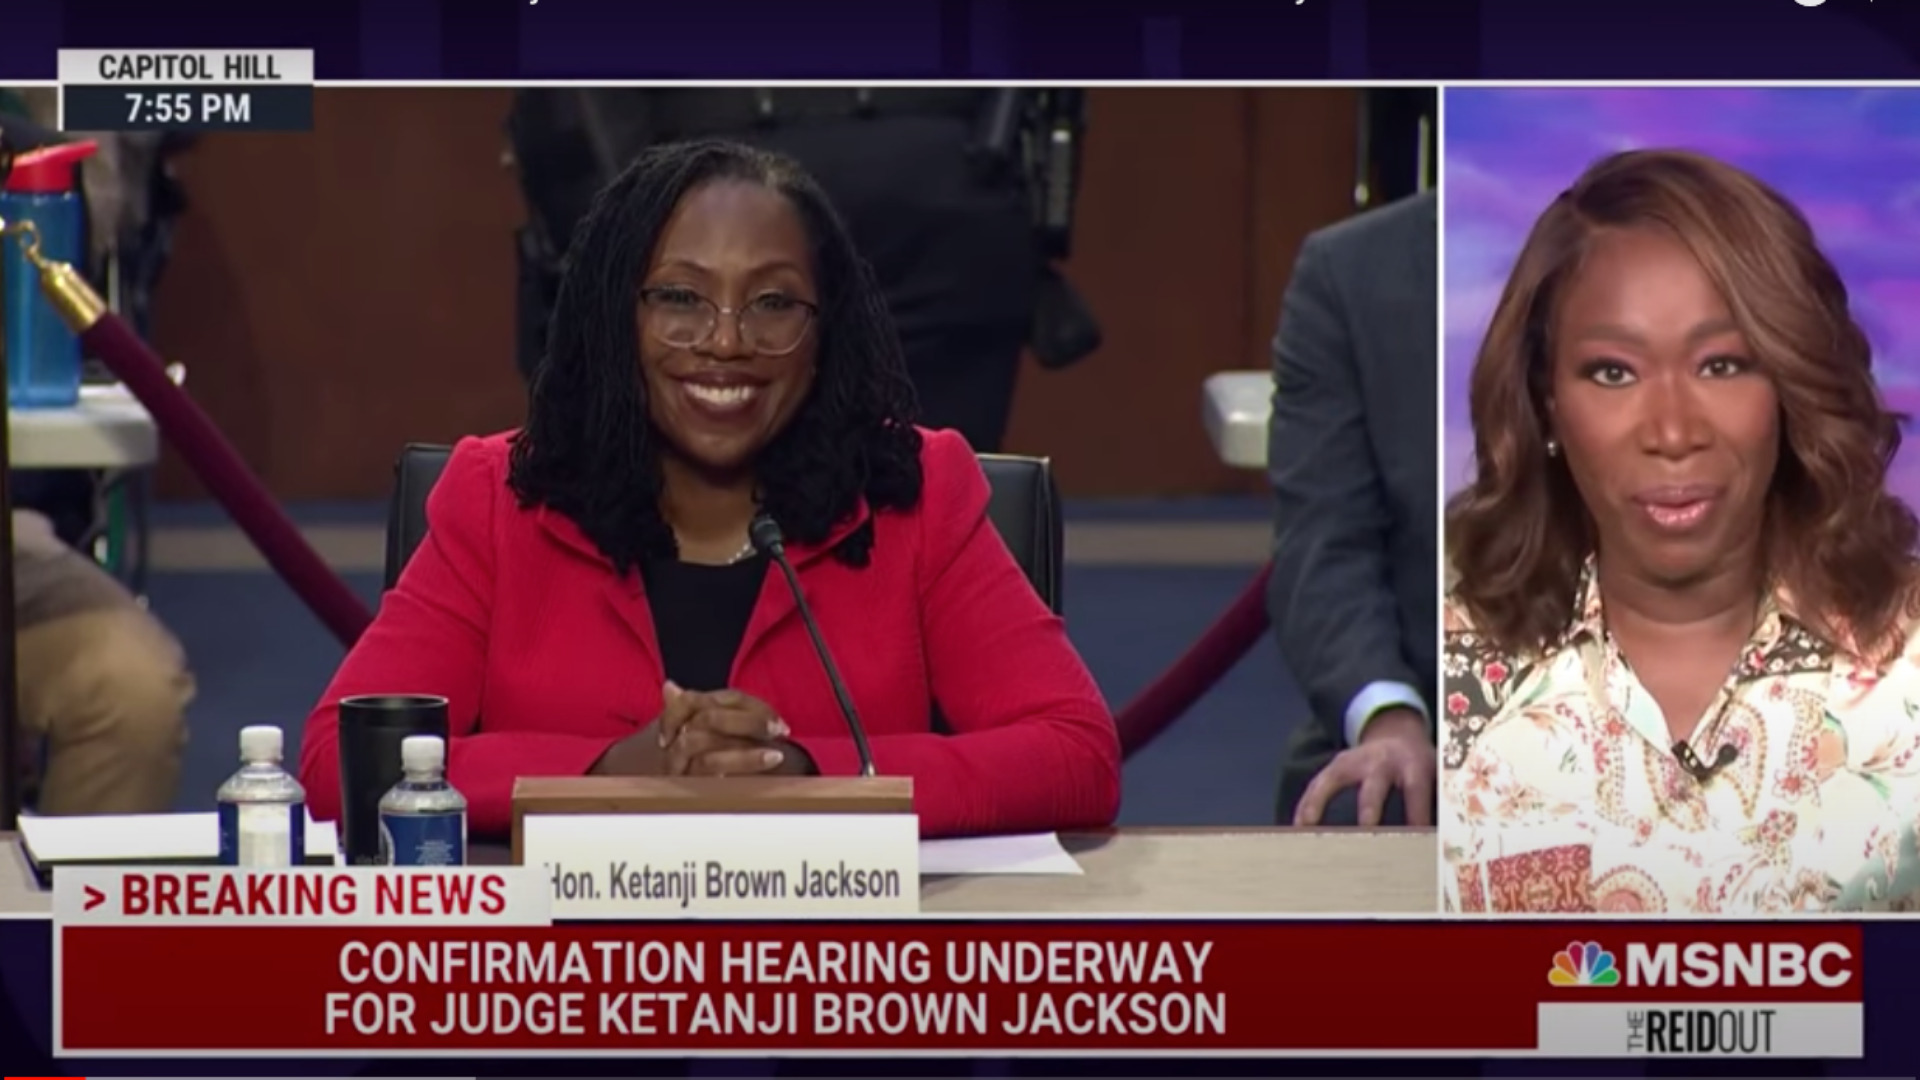 Joy Reid Says Republican Child Pornography Questions To Judge Jackson An Attempt ‘To Activate QAnon Voters’